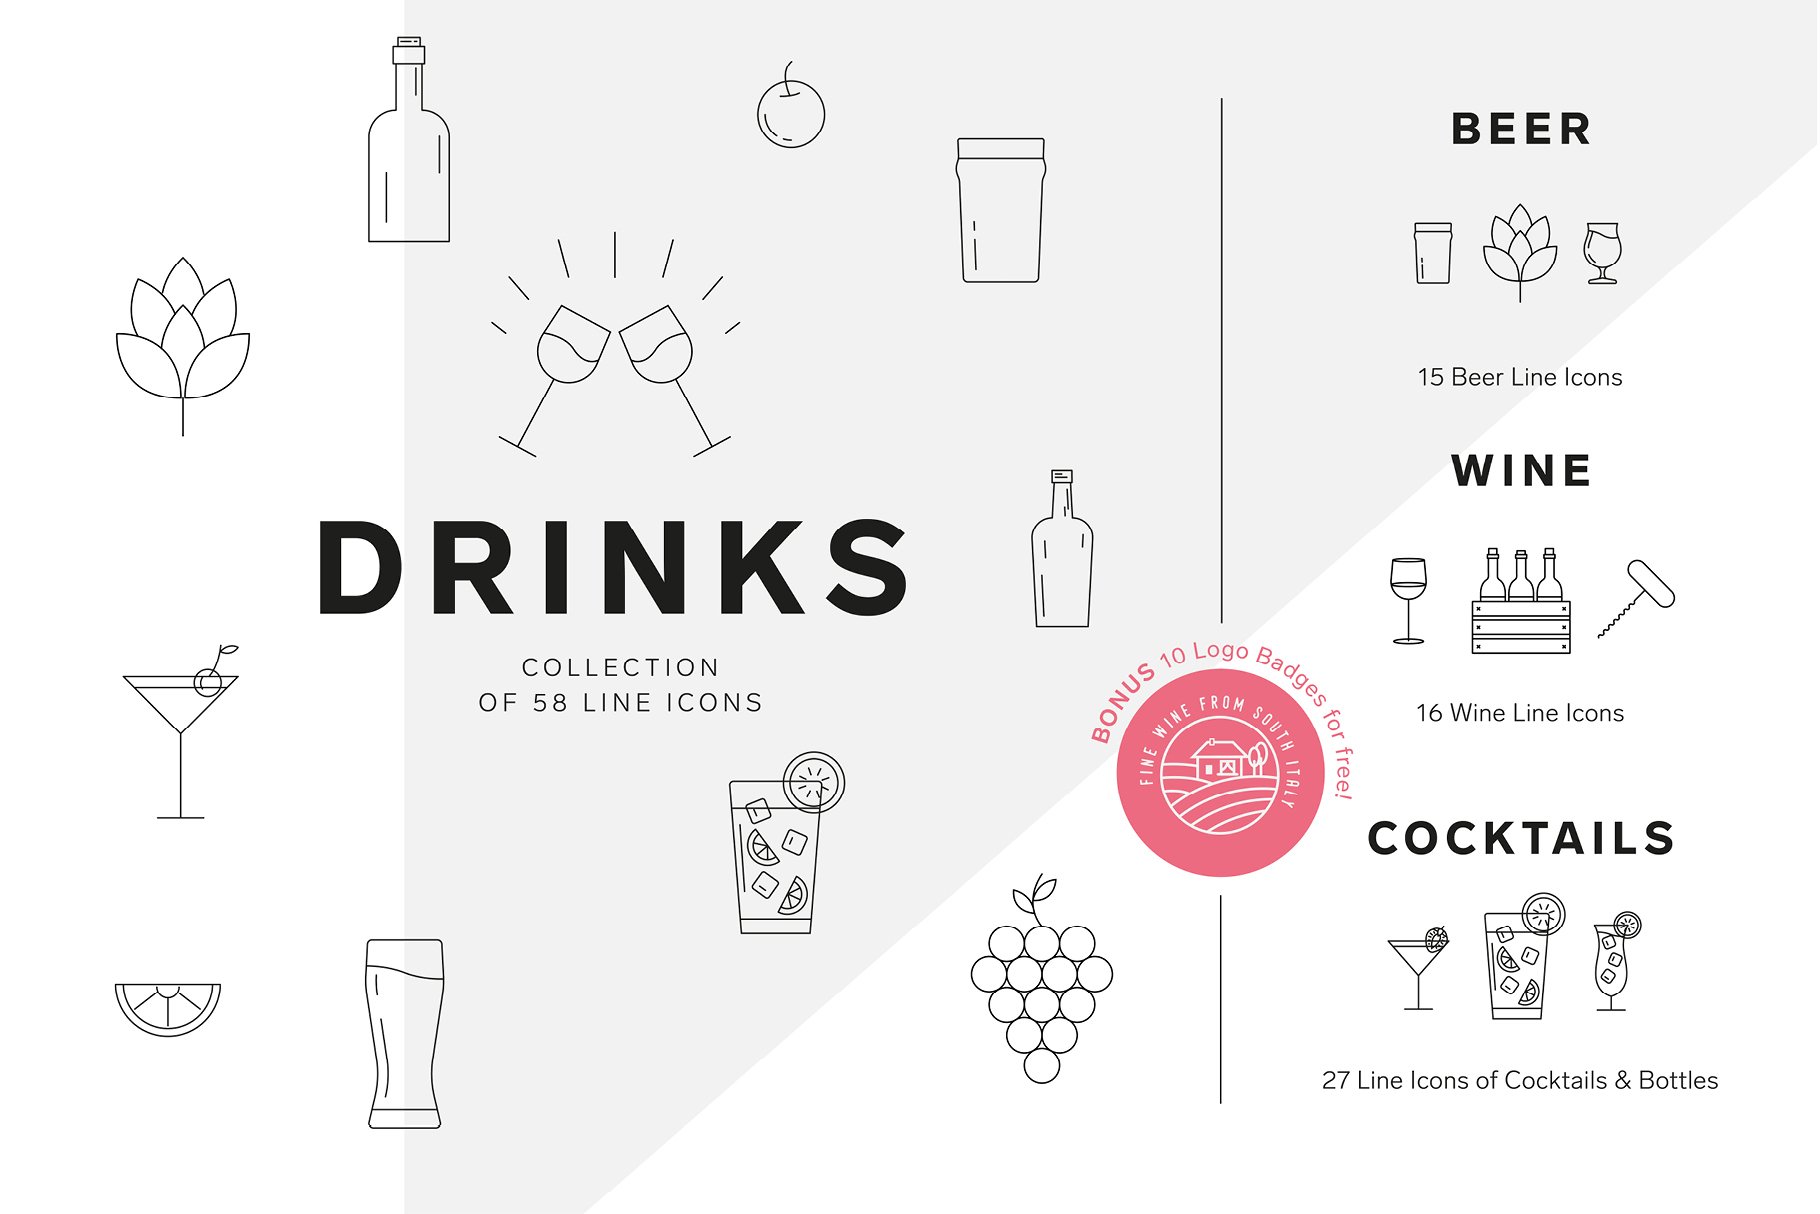 DRINKS ICON SET cover image.